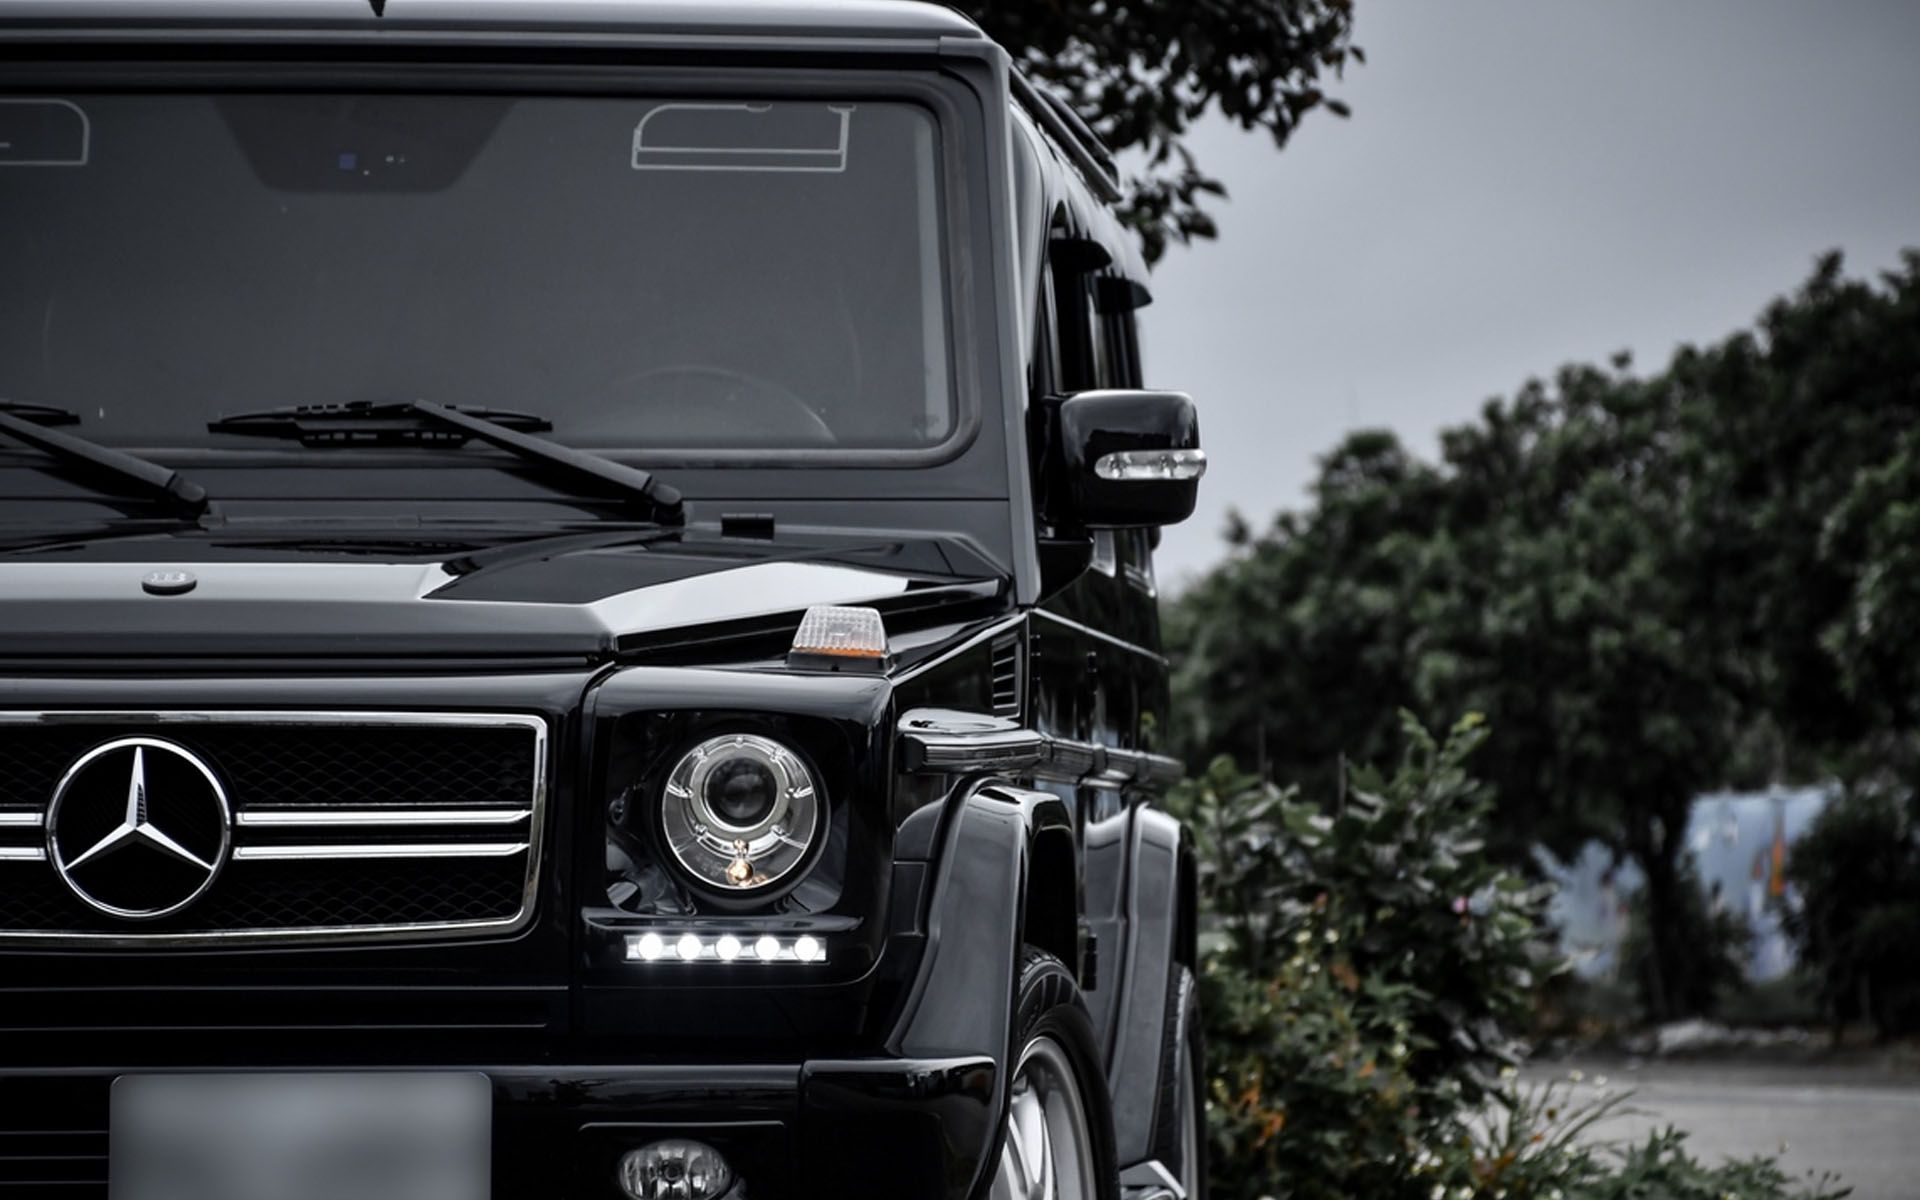 Mercedes Benz G500 HD Wallpaper With Image